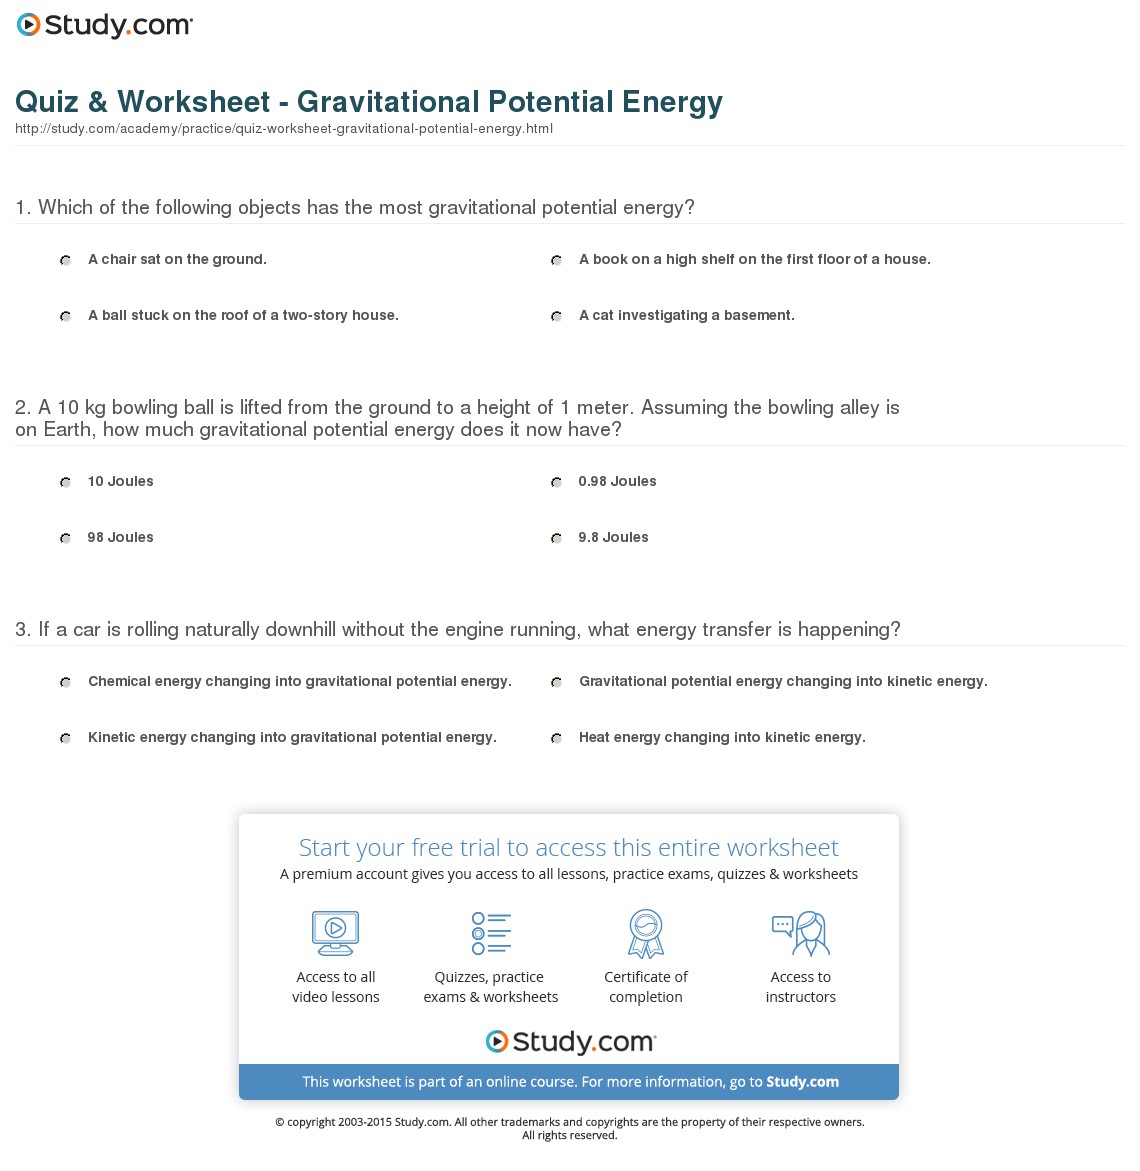 Kinetic And Potential Energy Calculations Worksheet 1397597